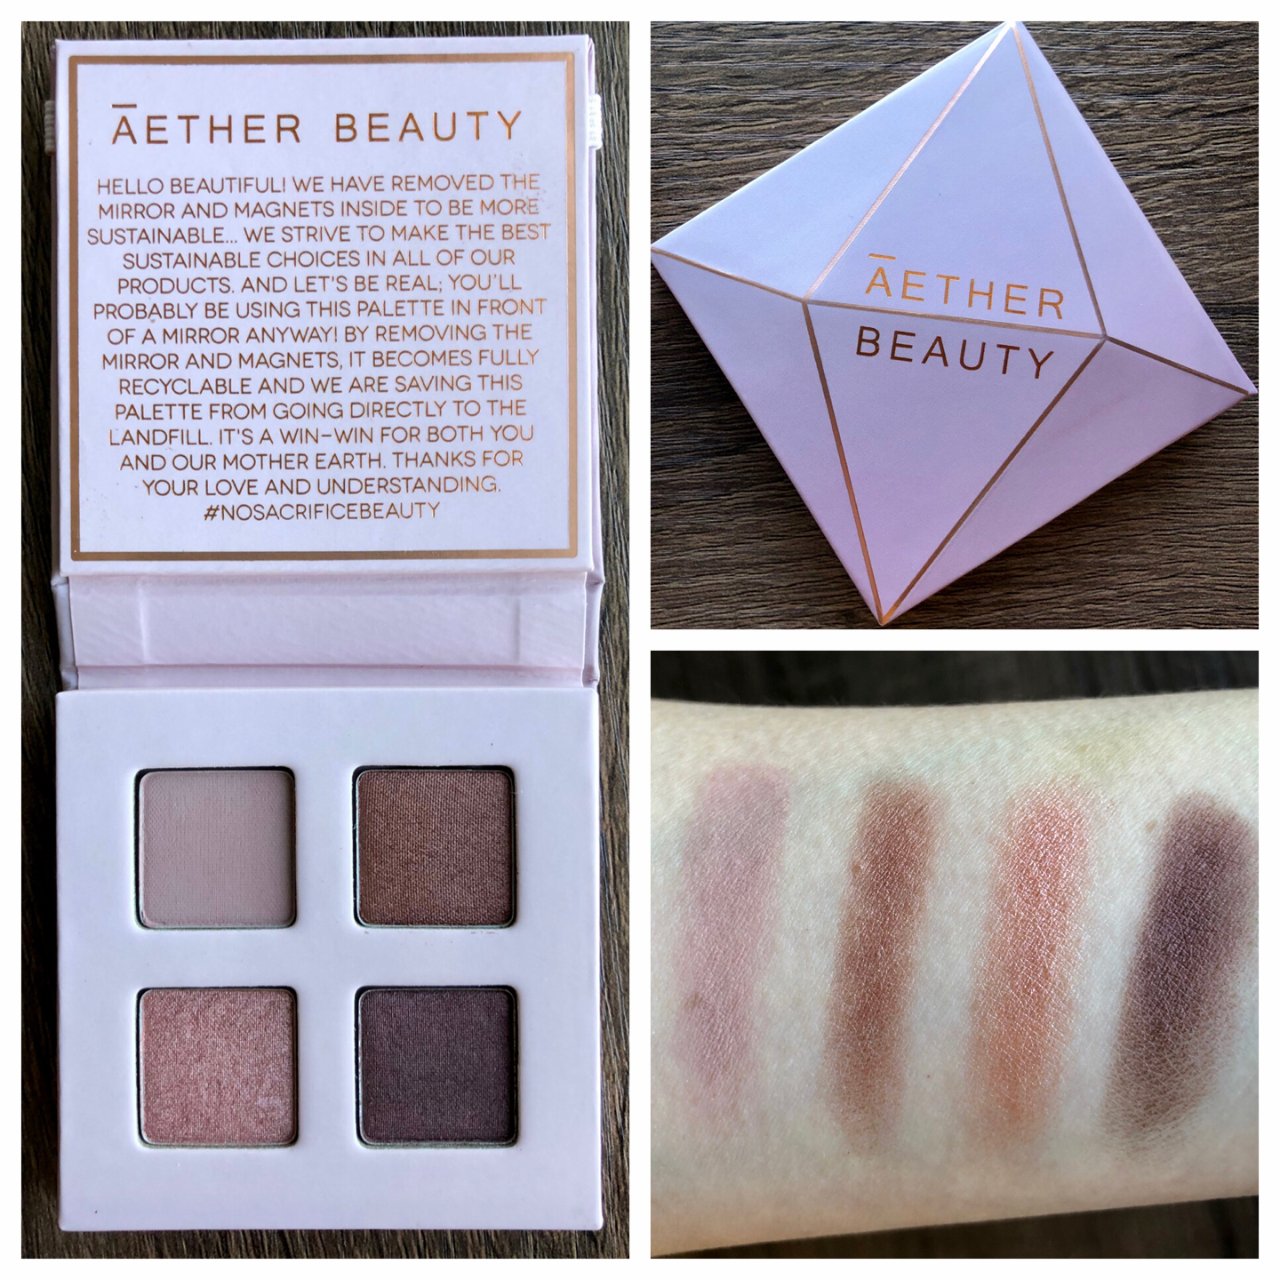 Aether Beauty,Urban Outfitters,Aether Beauty Mini Crystal Palette | Urb